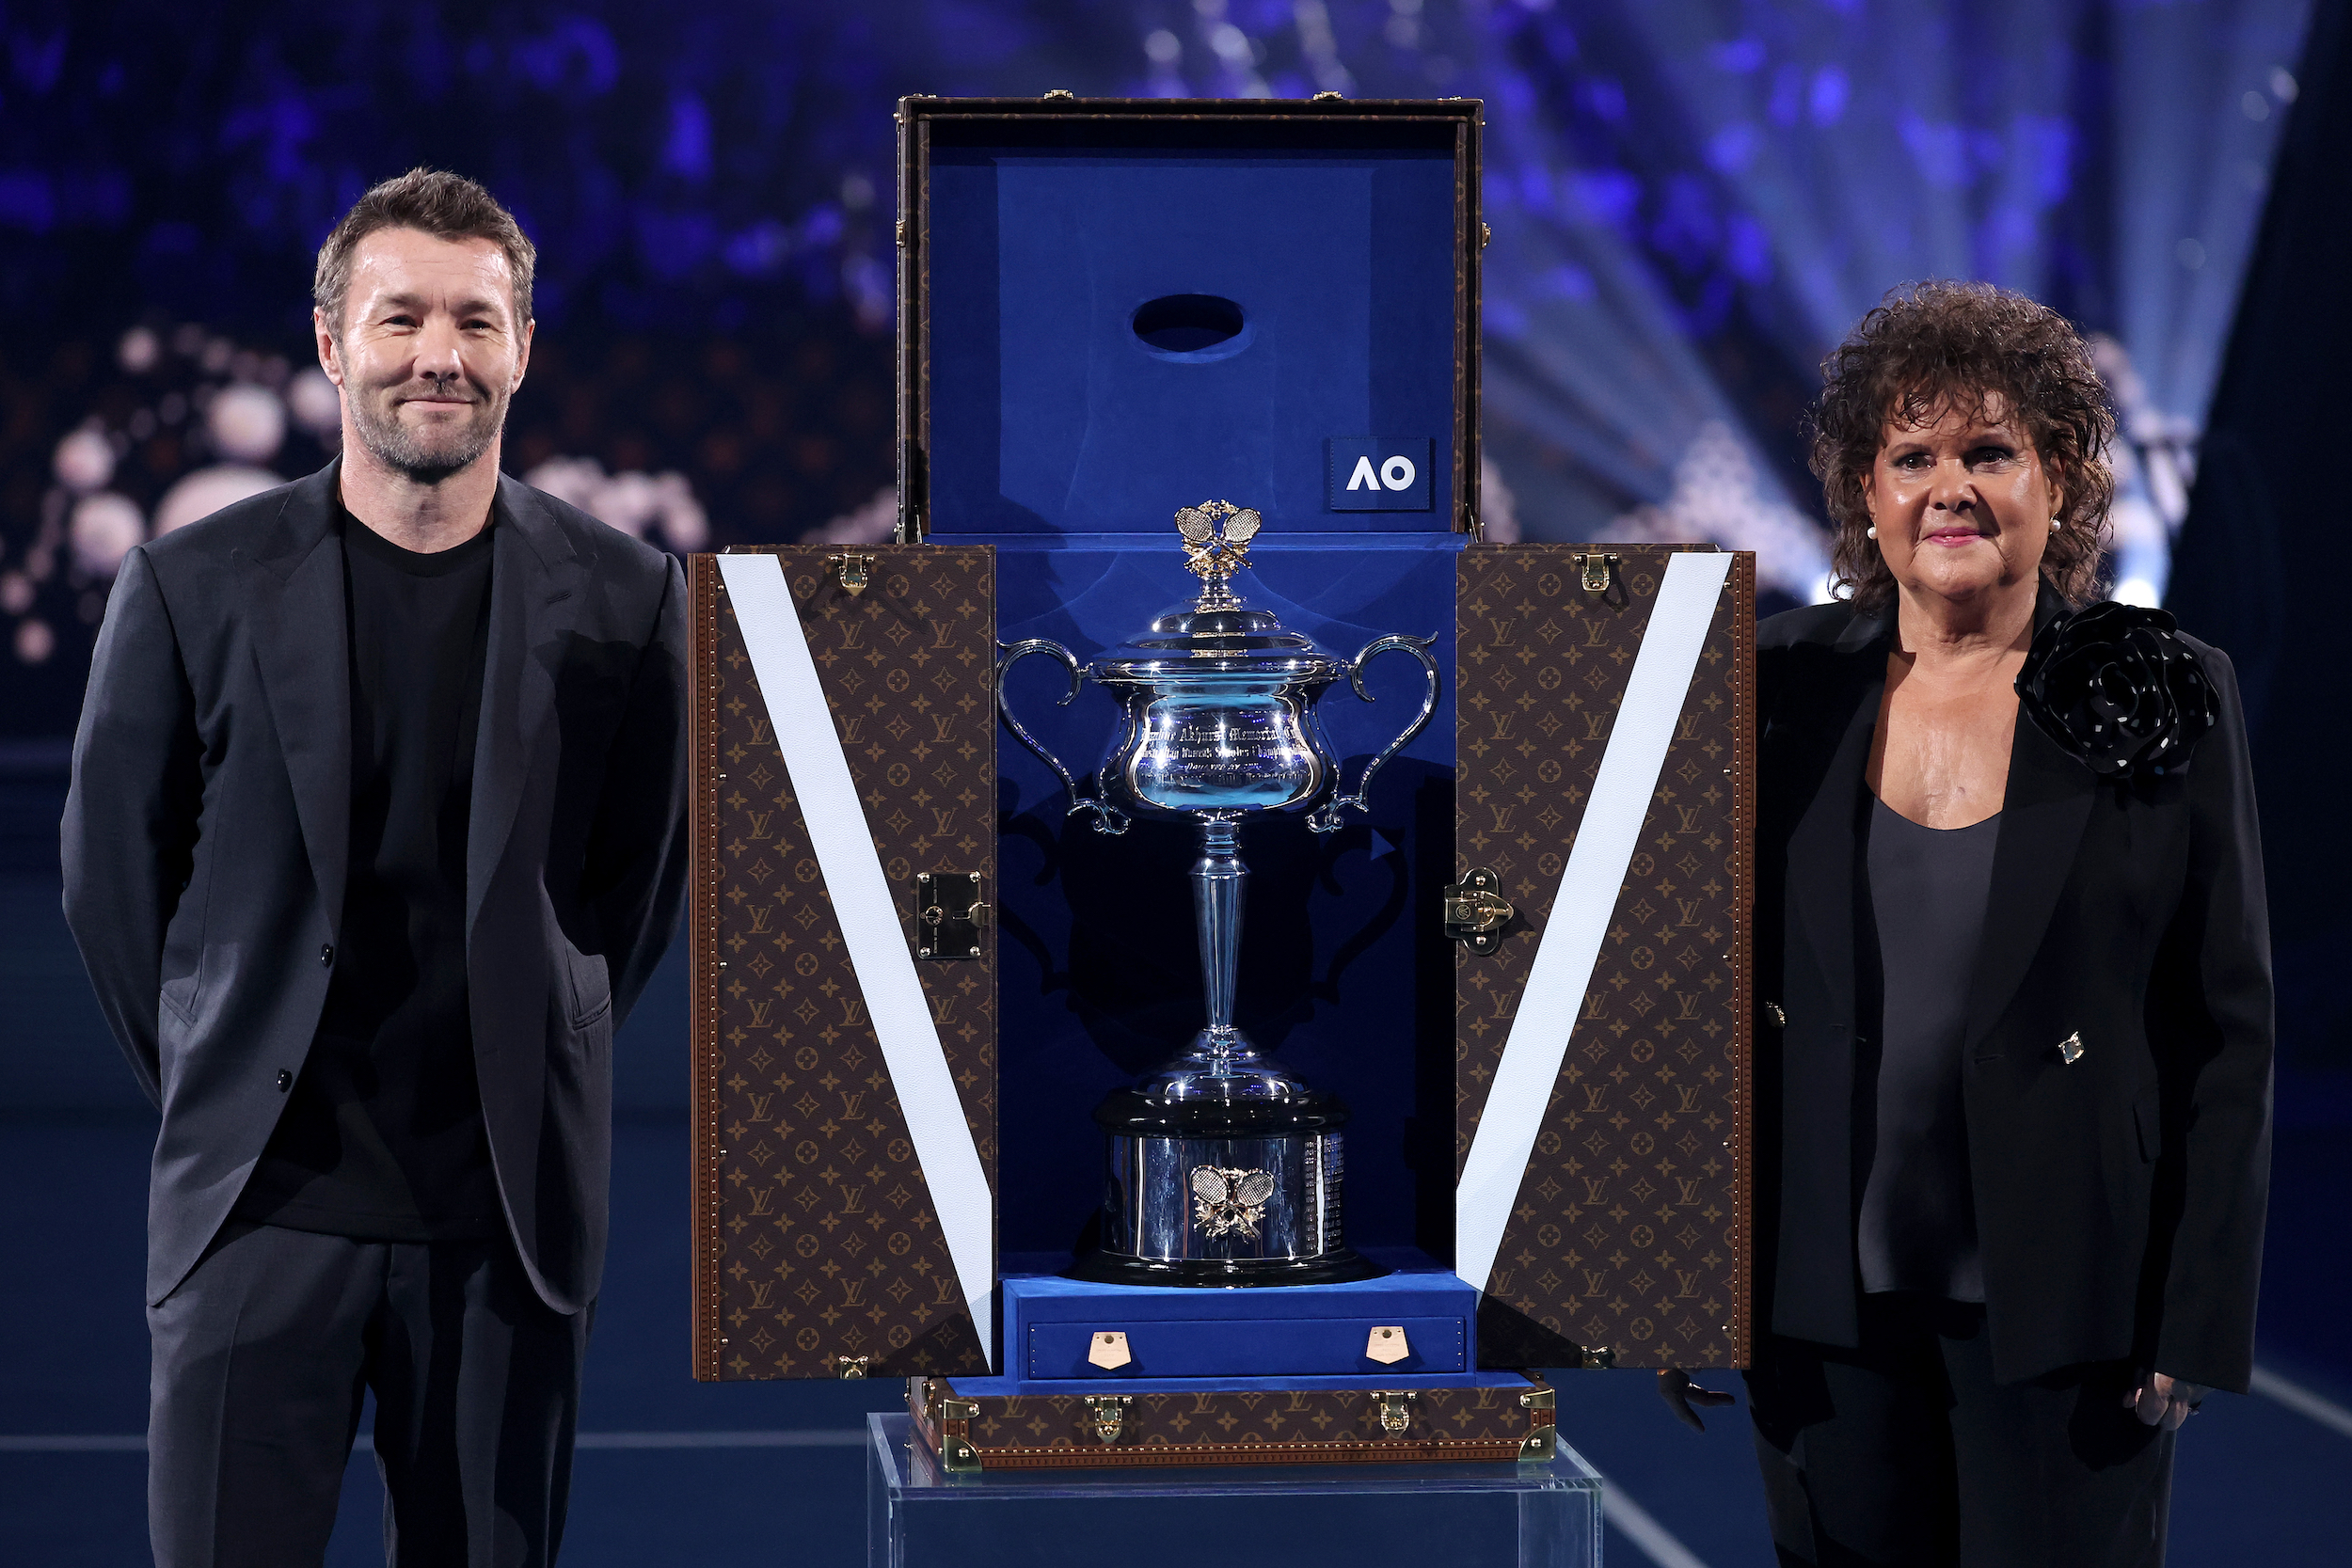 Joel Edgerton and Evonne Goolagong Cawley stand beside the open Louis Vuitton trophy trunk displaying the Daphne Akhurst Memorial Cup at the 2024 Australian Open.